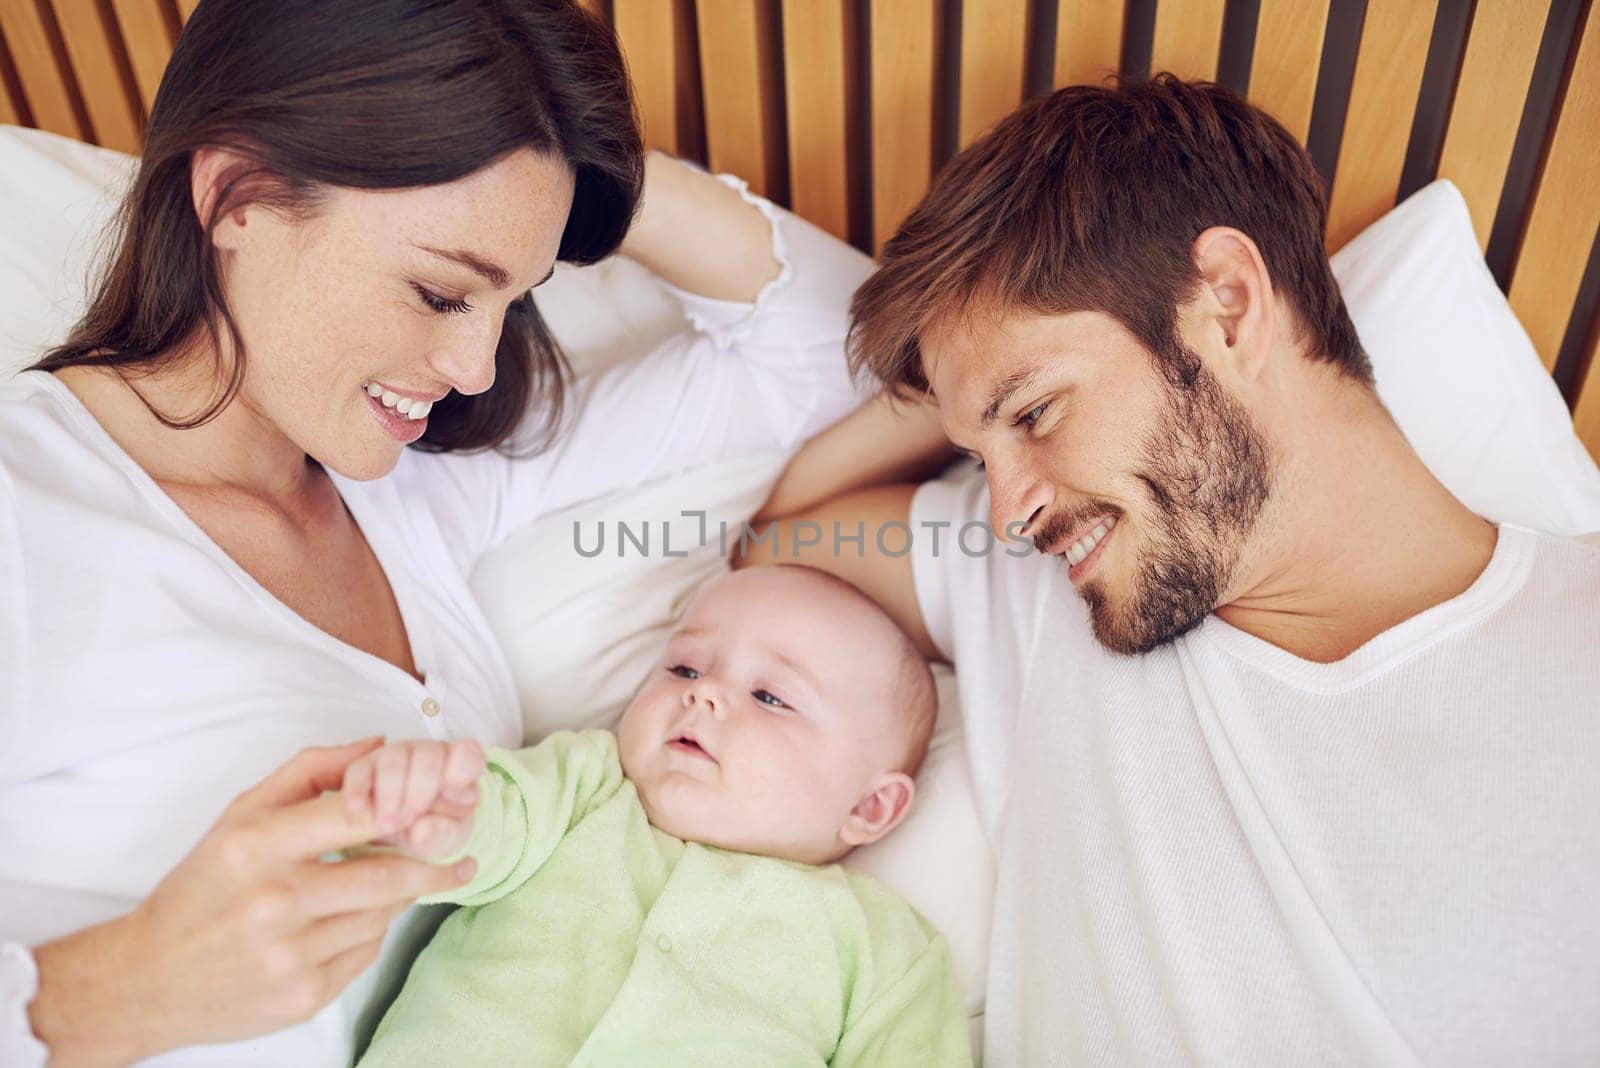 Top view, parents and smile of baby in bedroom for love, care and quality time together at home. Happy mother, father and family relax with cute newborn kid on bed for support, development and joy.